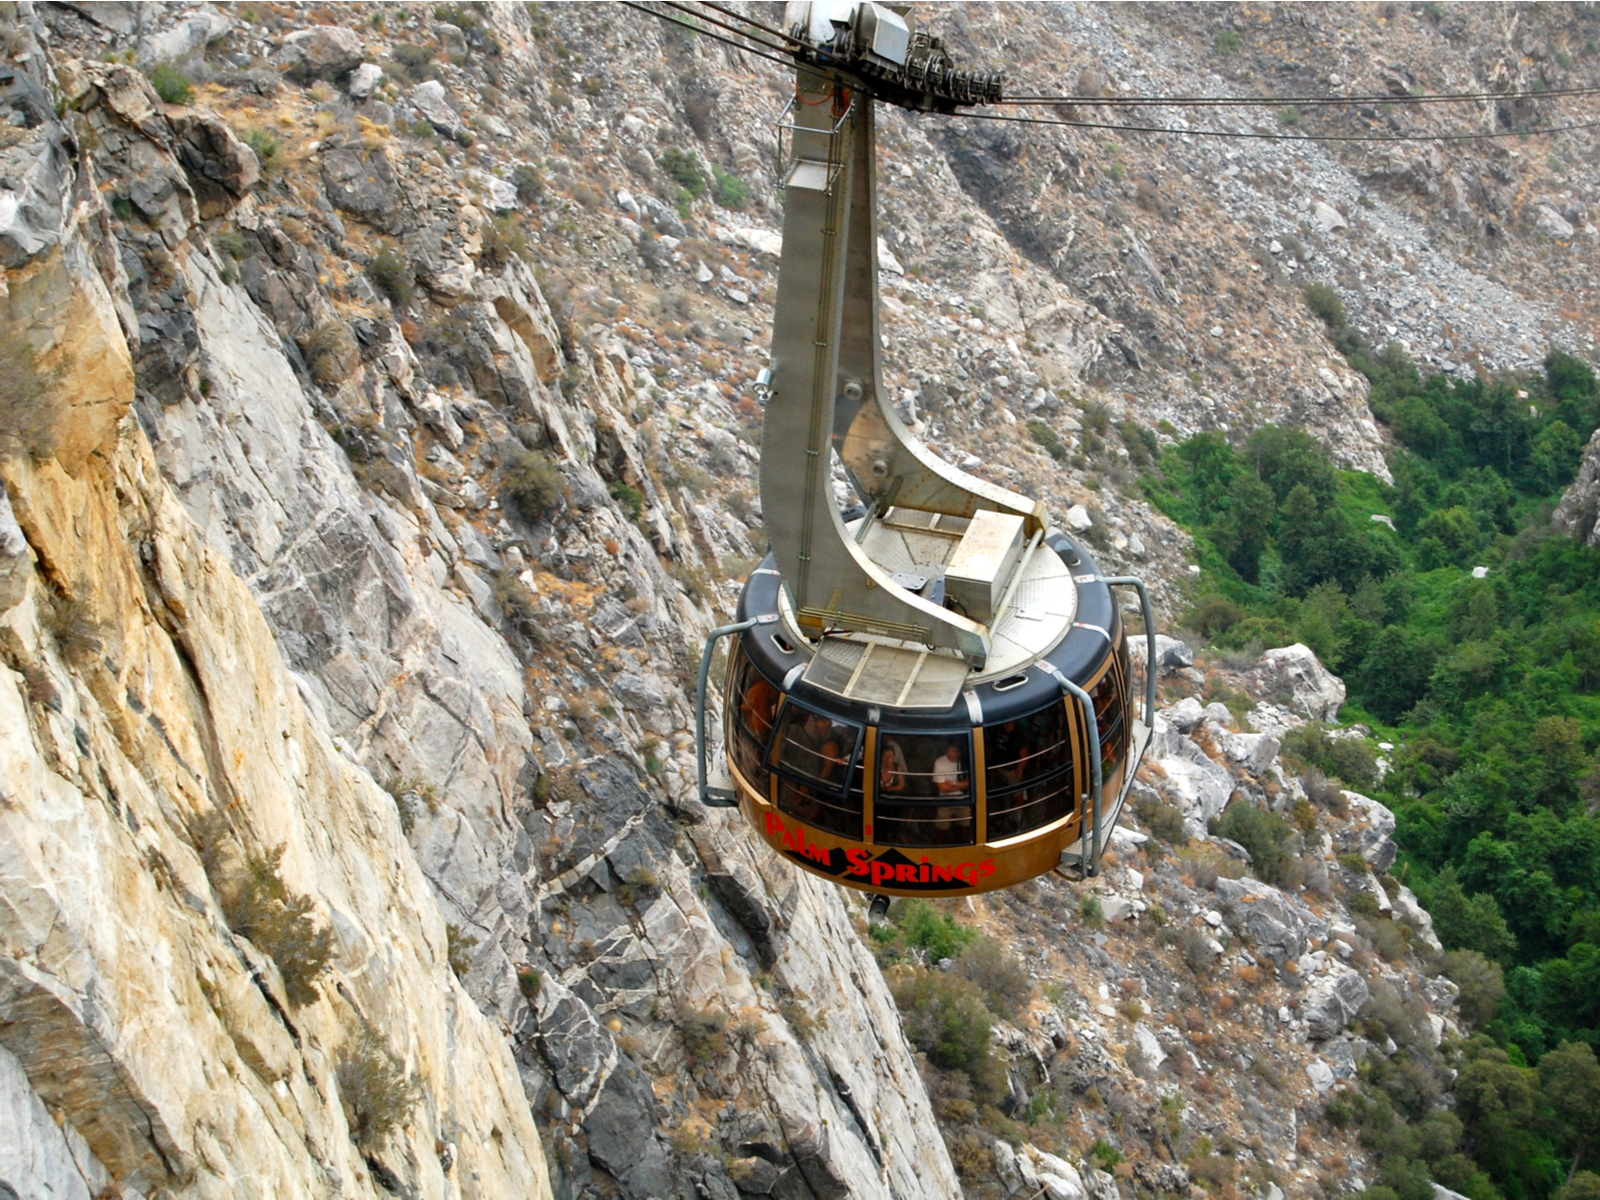 Palm Springs aerial tramway going over a hill